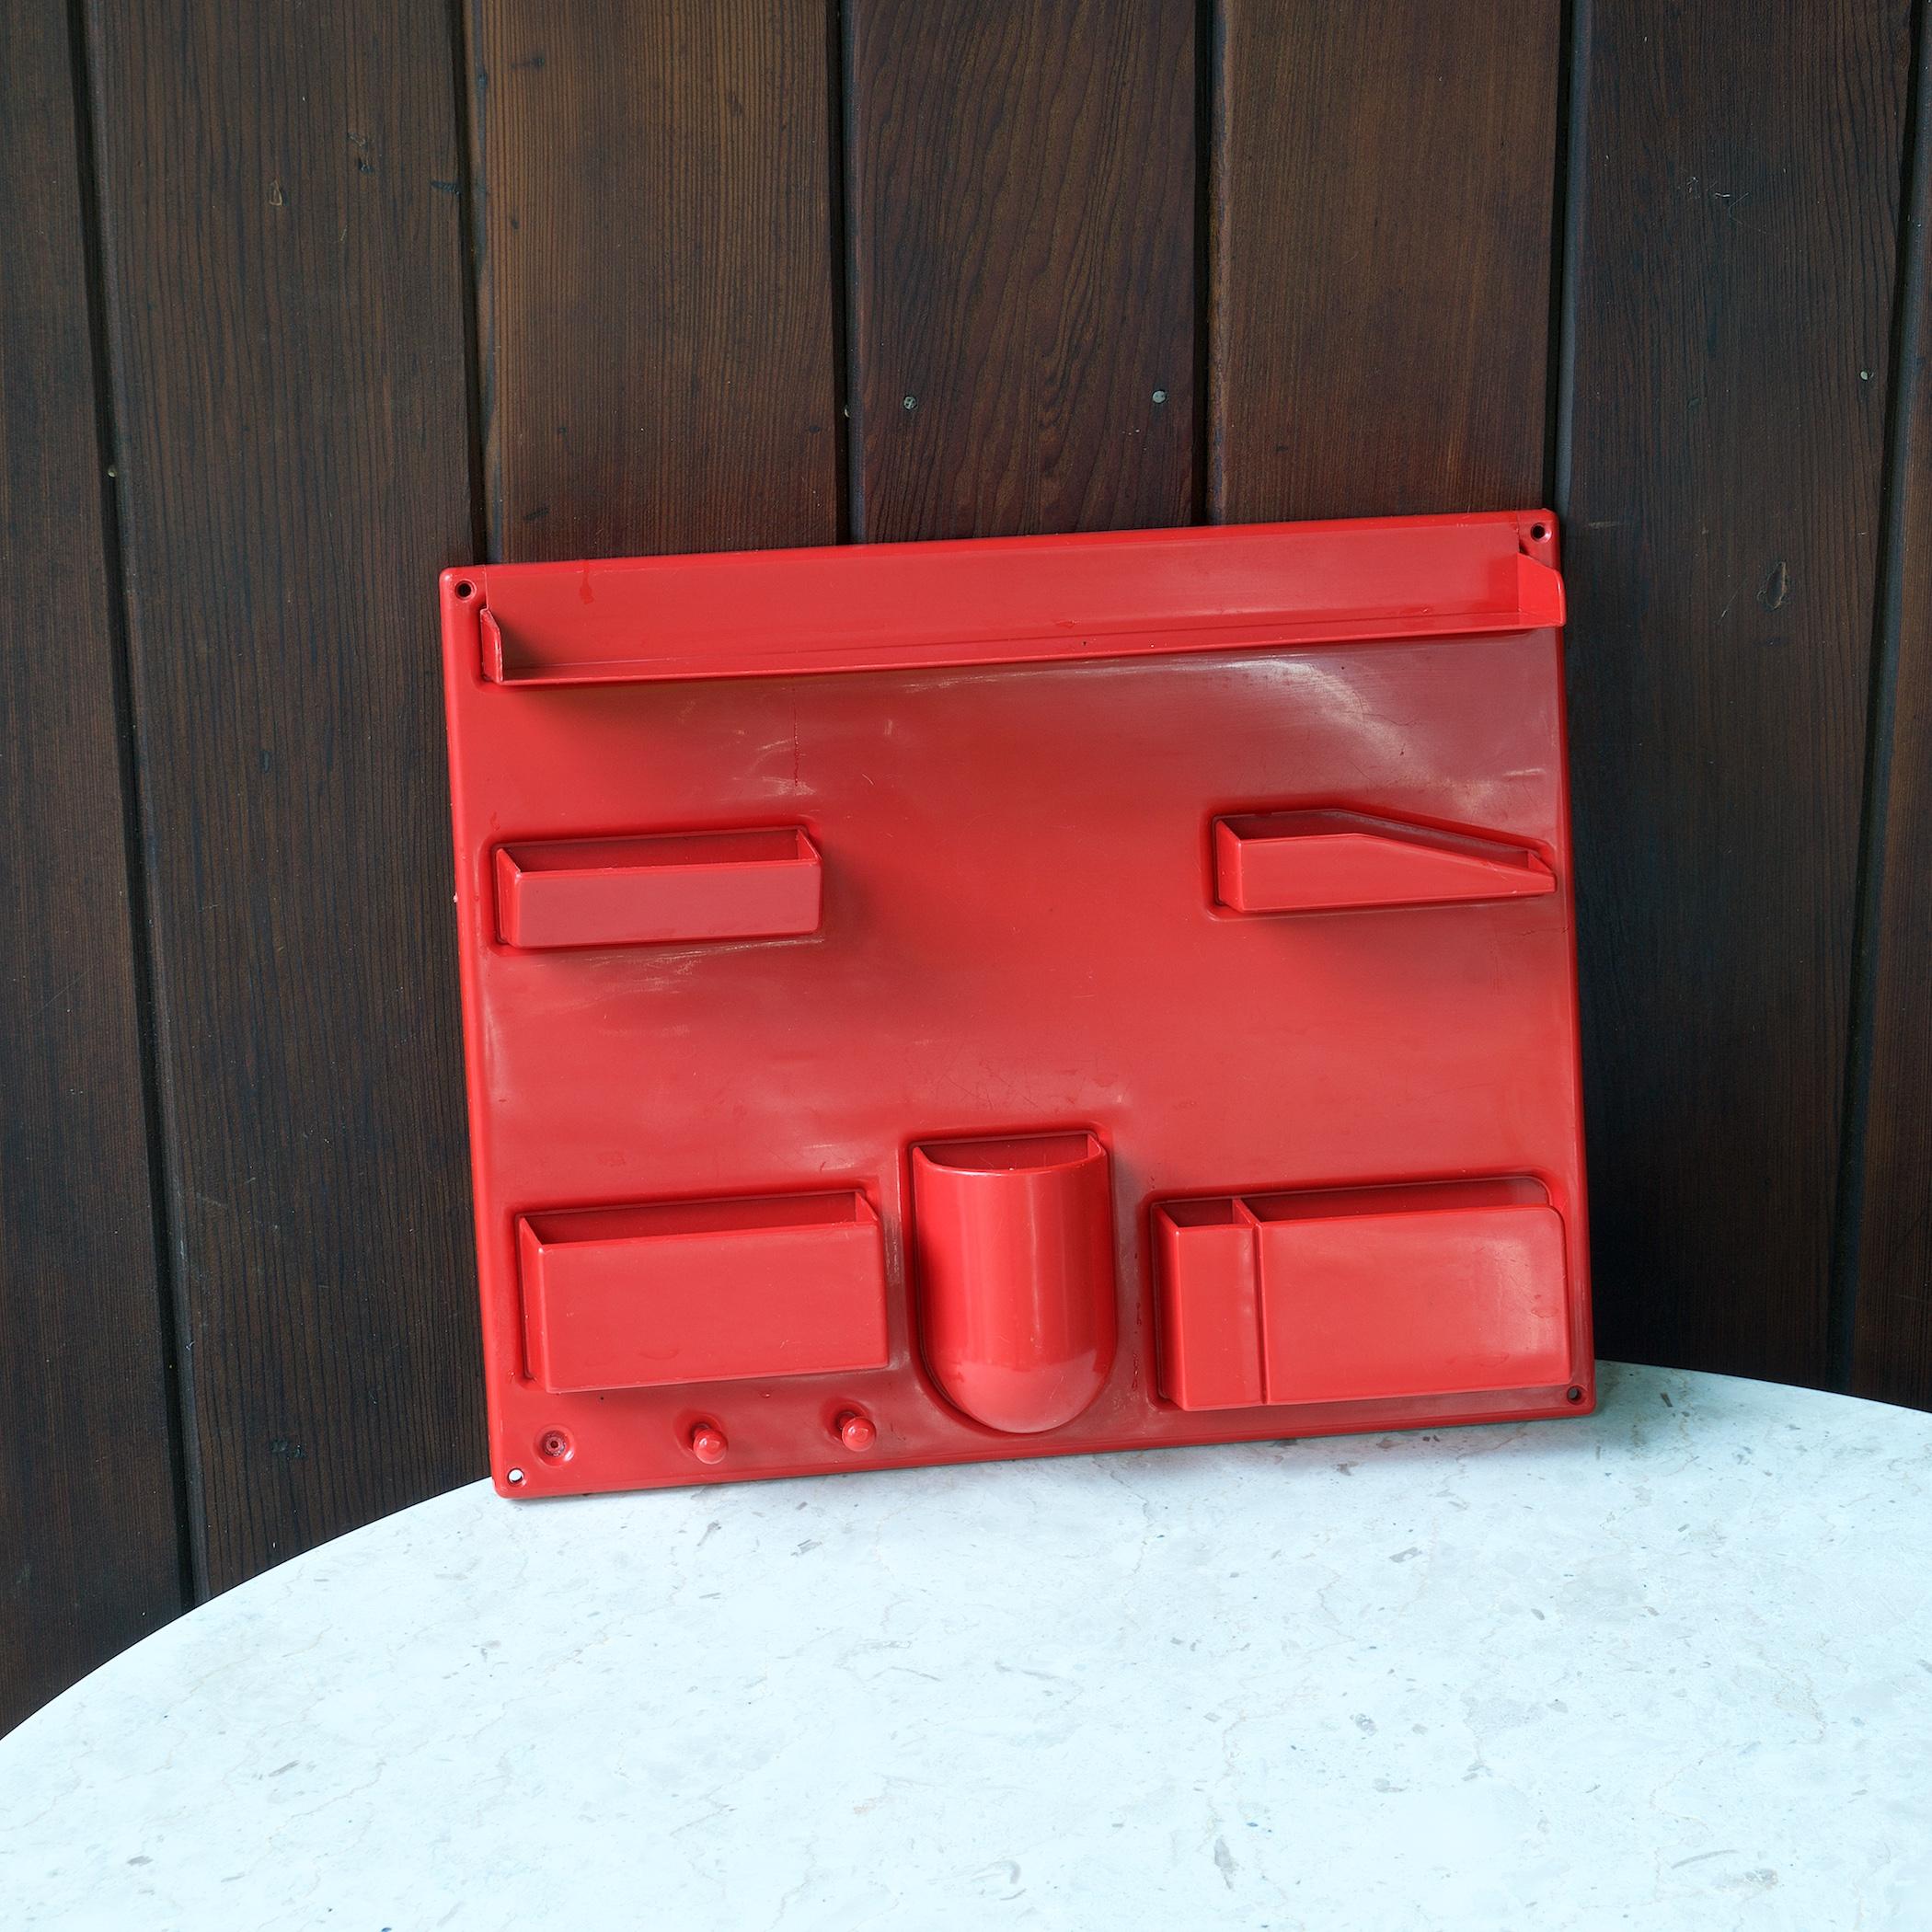 Interesting and well loved seventies pop-art survivor, relic. A wall mounting red plastic catch-all. Very old plastic wall art in your home or studio! Missing one key hook on left.